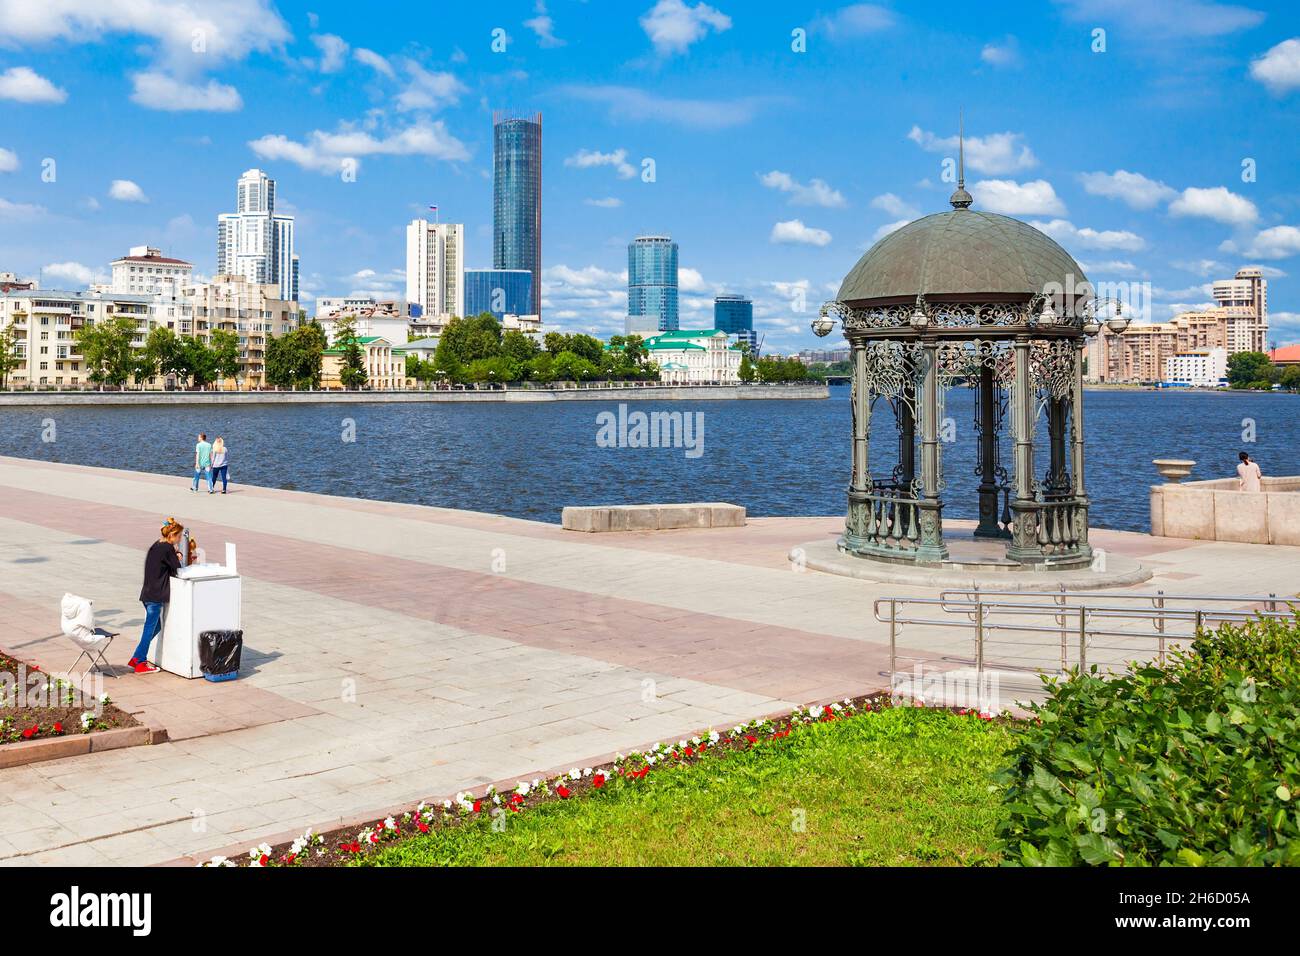 Yekaterinburg city center skyline and Iset river. Ekaterinburg is the fourth largest city in Russia and the centre of Sverdlovsk Oblast. Stock Photo